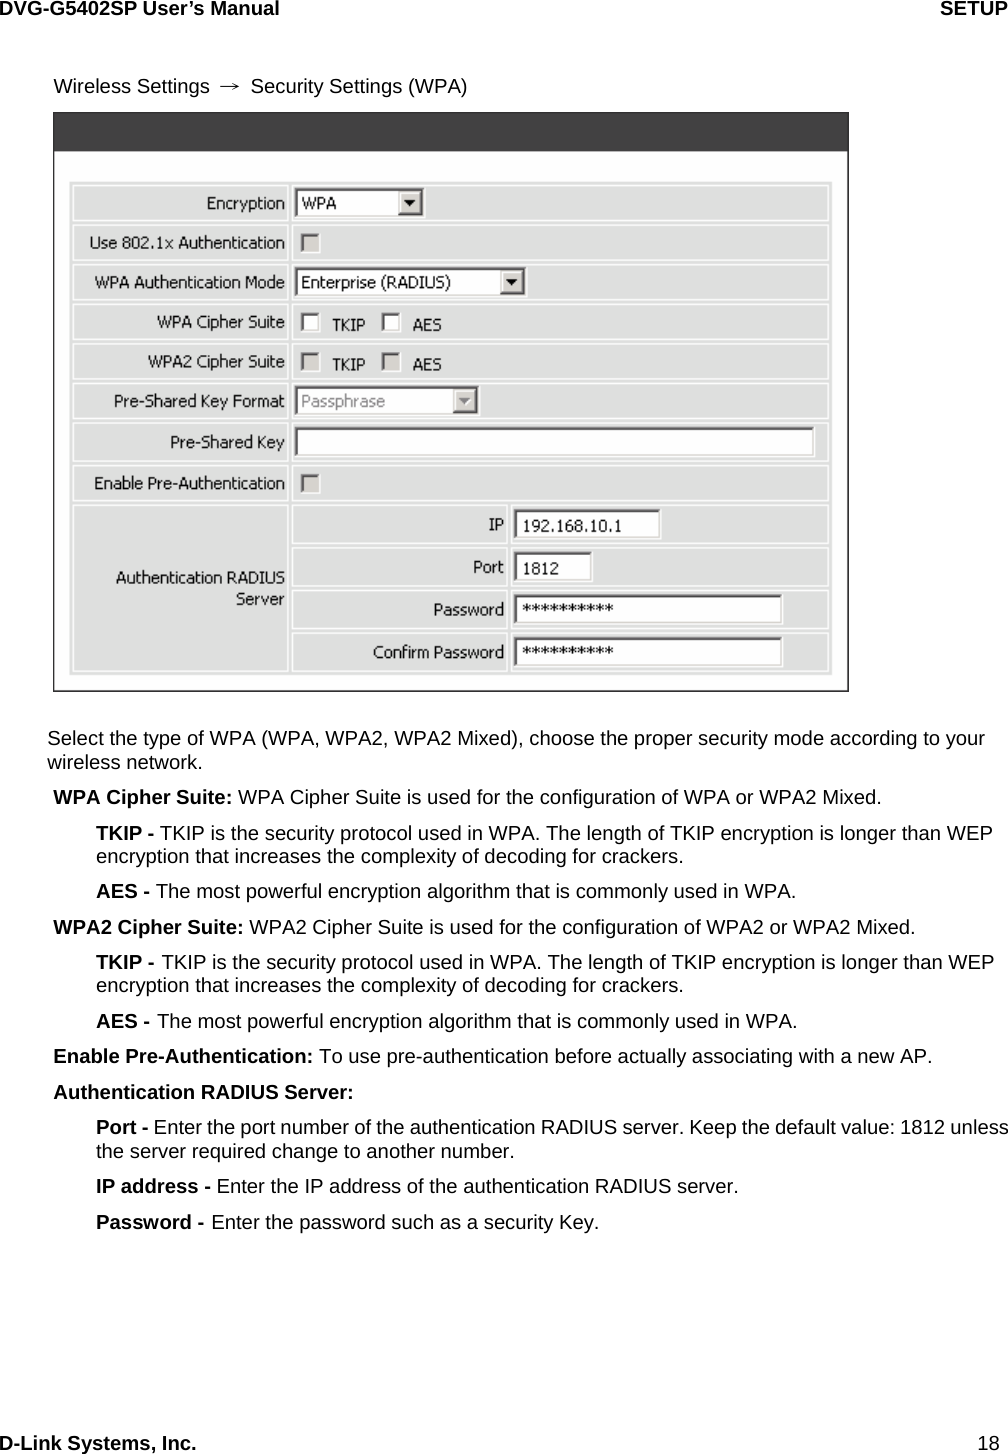 DVG-G5402SP User’s Manual                                   SETUP D-Link Systems, Inc.                                                                             18 Wireless Settings  →  Security Settings (WPA)   Select the type of WPA (WPA, WPA2, WPA2 Mixed), choose the proper security mode according to your wireless network. WPA Cipher Suite: WPA Cipher Suite is used for the configuration of WPA or WPA2 Mixed. TKIP - TKIP is the security protocol used in WPA. The length of TKIP encryption is longer than WEP encryption that increases the complexity of decoding for crackers.   AES - The most powerful encryption algorithm that is commonly used in WPA. WPA2 Cipher Suite: WPA2 Cipher Suite is used for the configuration of WPA2 or WPA2 Mixed. TKIP - TKIP is the security protocol used in WPA. The length of TKIP encryption is longer than WEP encryption that increases the complexity of decoding for crackers.   AES - The most powerful encryption algorithm that is commonly used in WPA. Enable Pre-Authentication: To use pre-authentication before actually associating with a new AP. Authentication RADIUS Server:   Port - Enter the port number of the authentication RADIUS server. Keep the default value: 1812 unless the server required change to another number. IP address - Enter the IP address of the authentication RADIUS server. Password - Enter the password such as a security Key.     